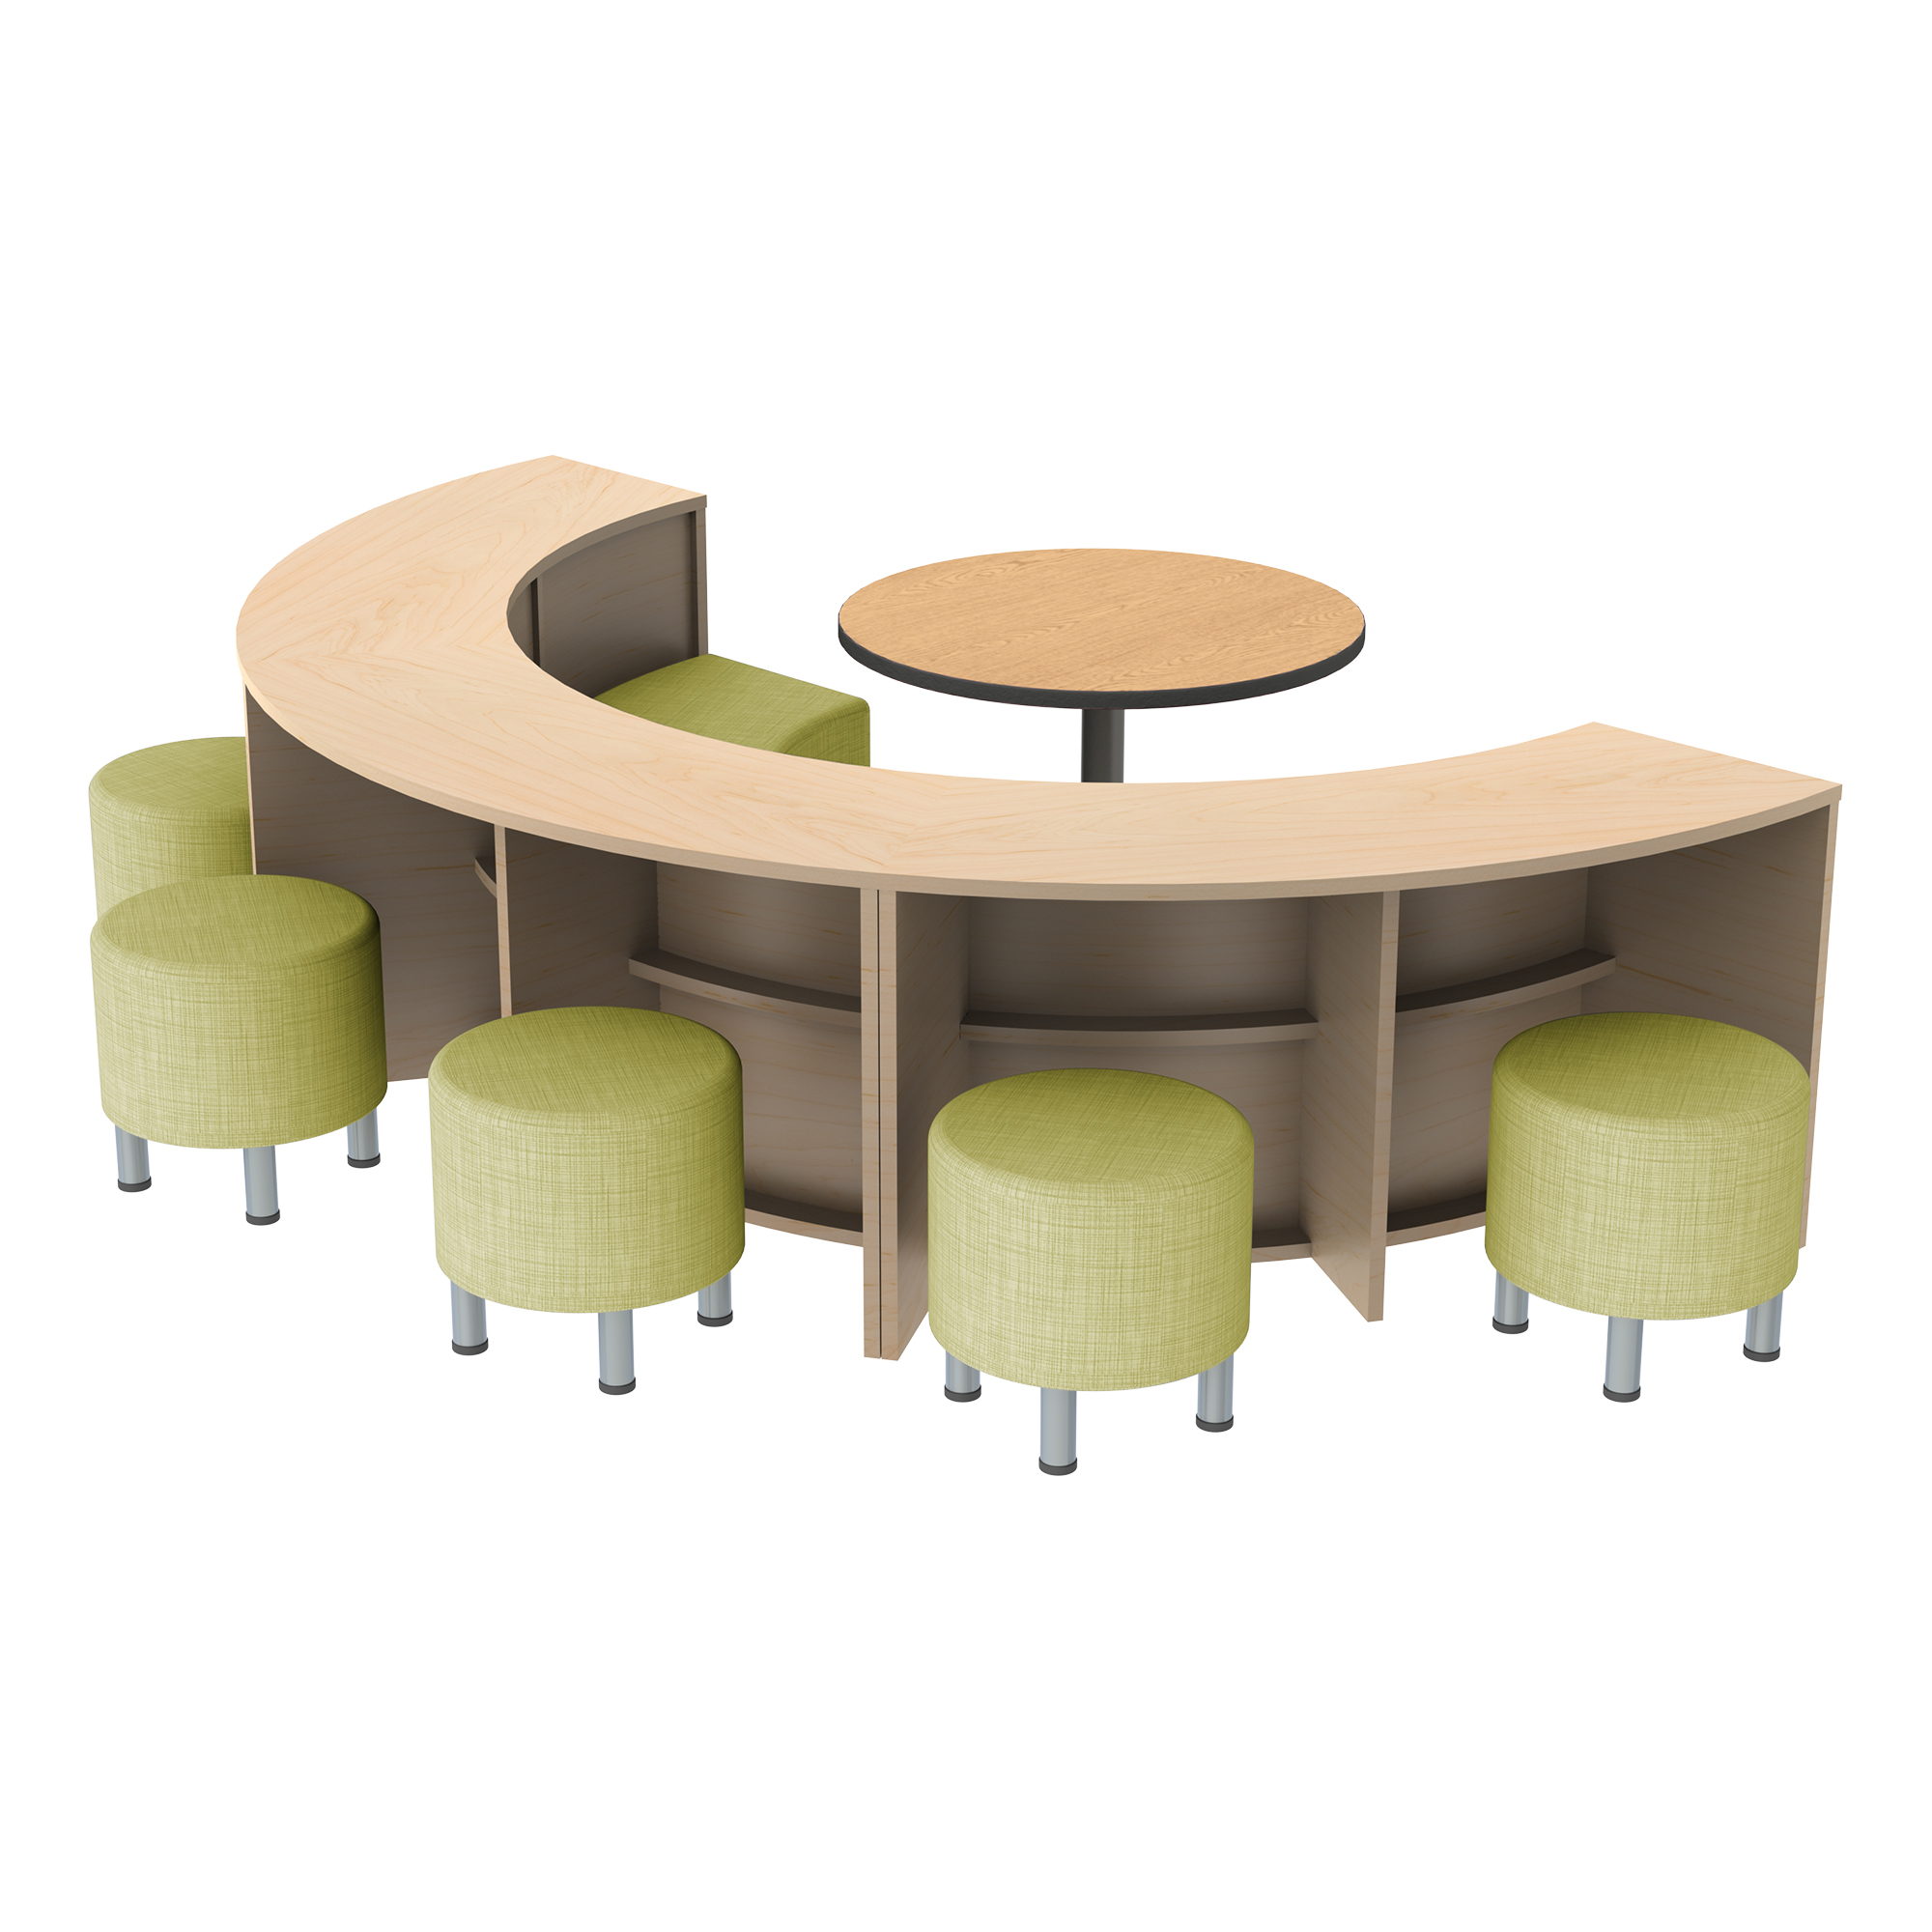 Shapes Series II Modular Soft Seating - Cylinder at School Outfitters